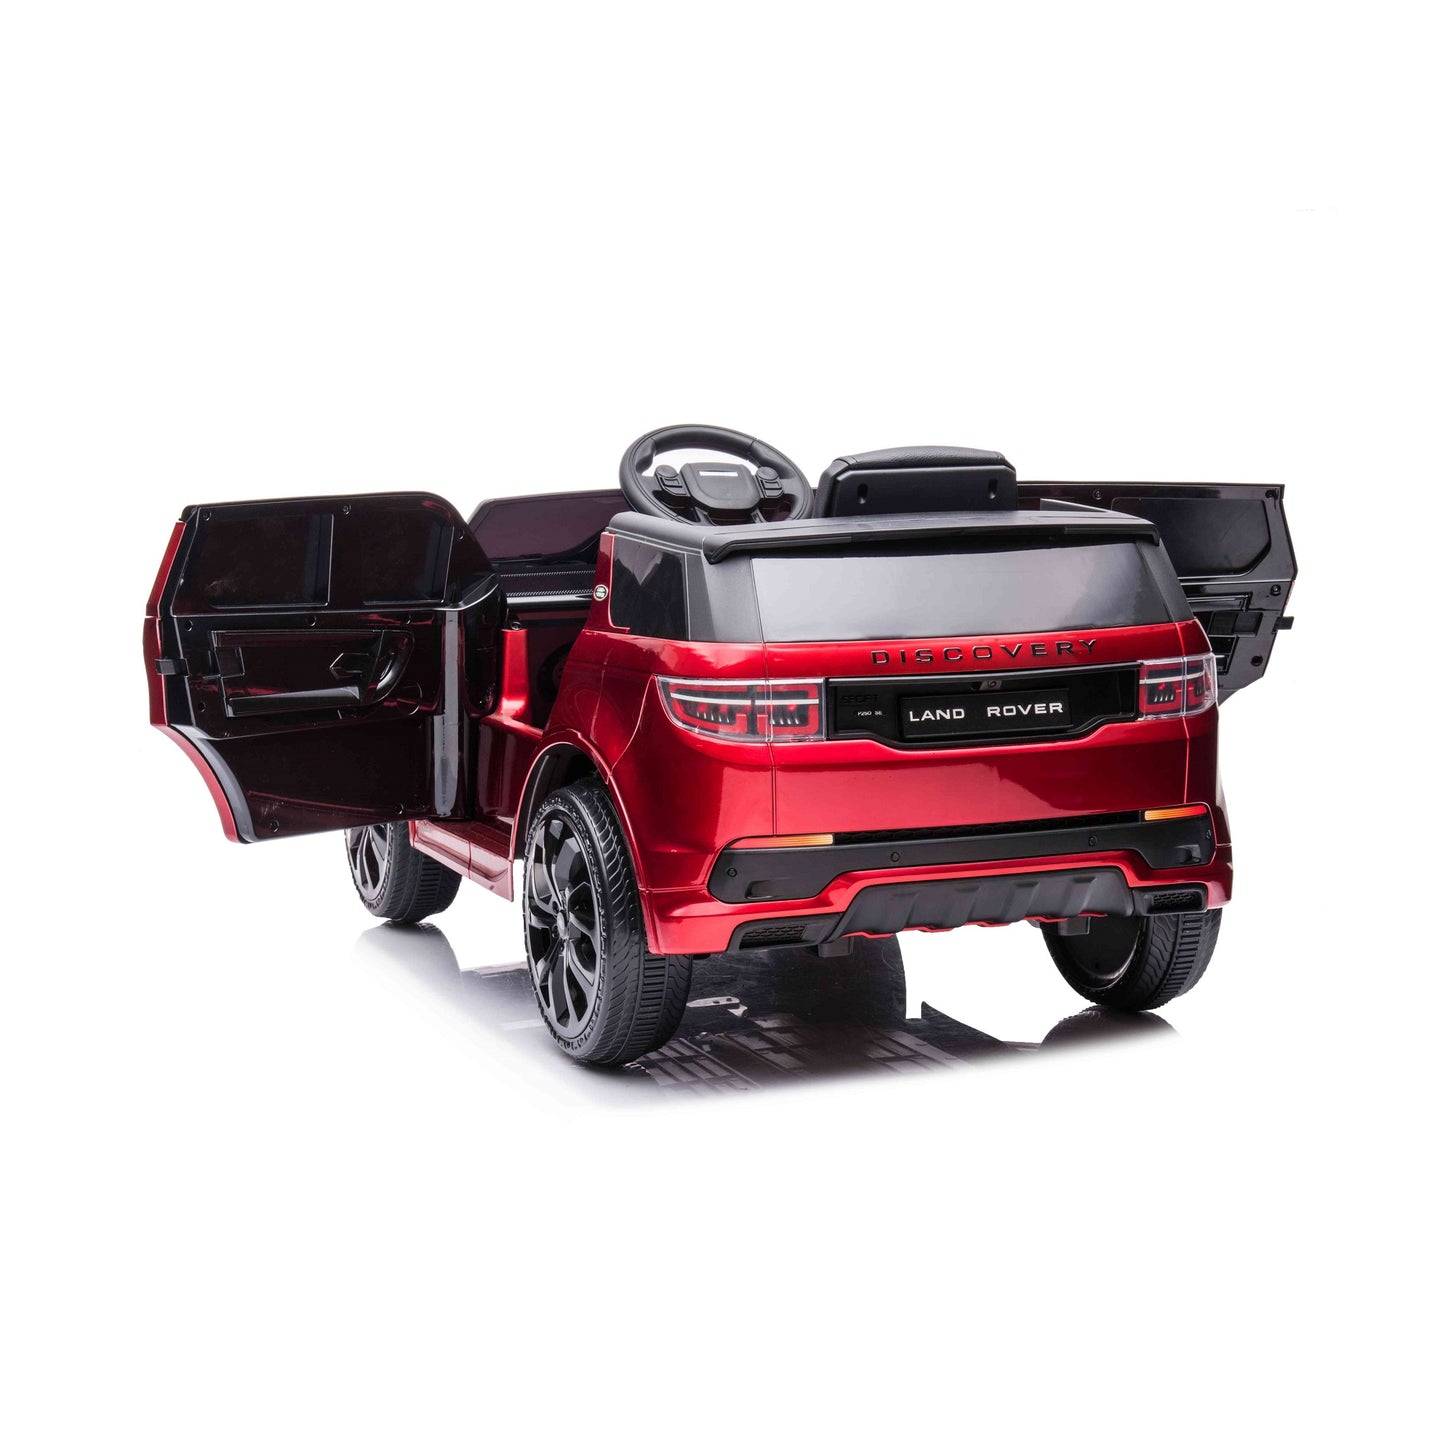 Licensed Range Discovery Sport 12v Kids Ride on Car with Remote -Metallic Red